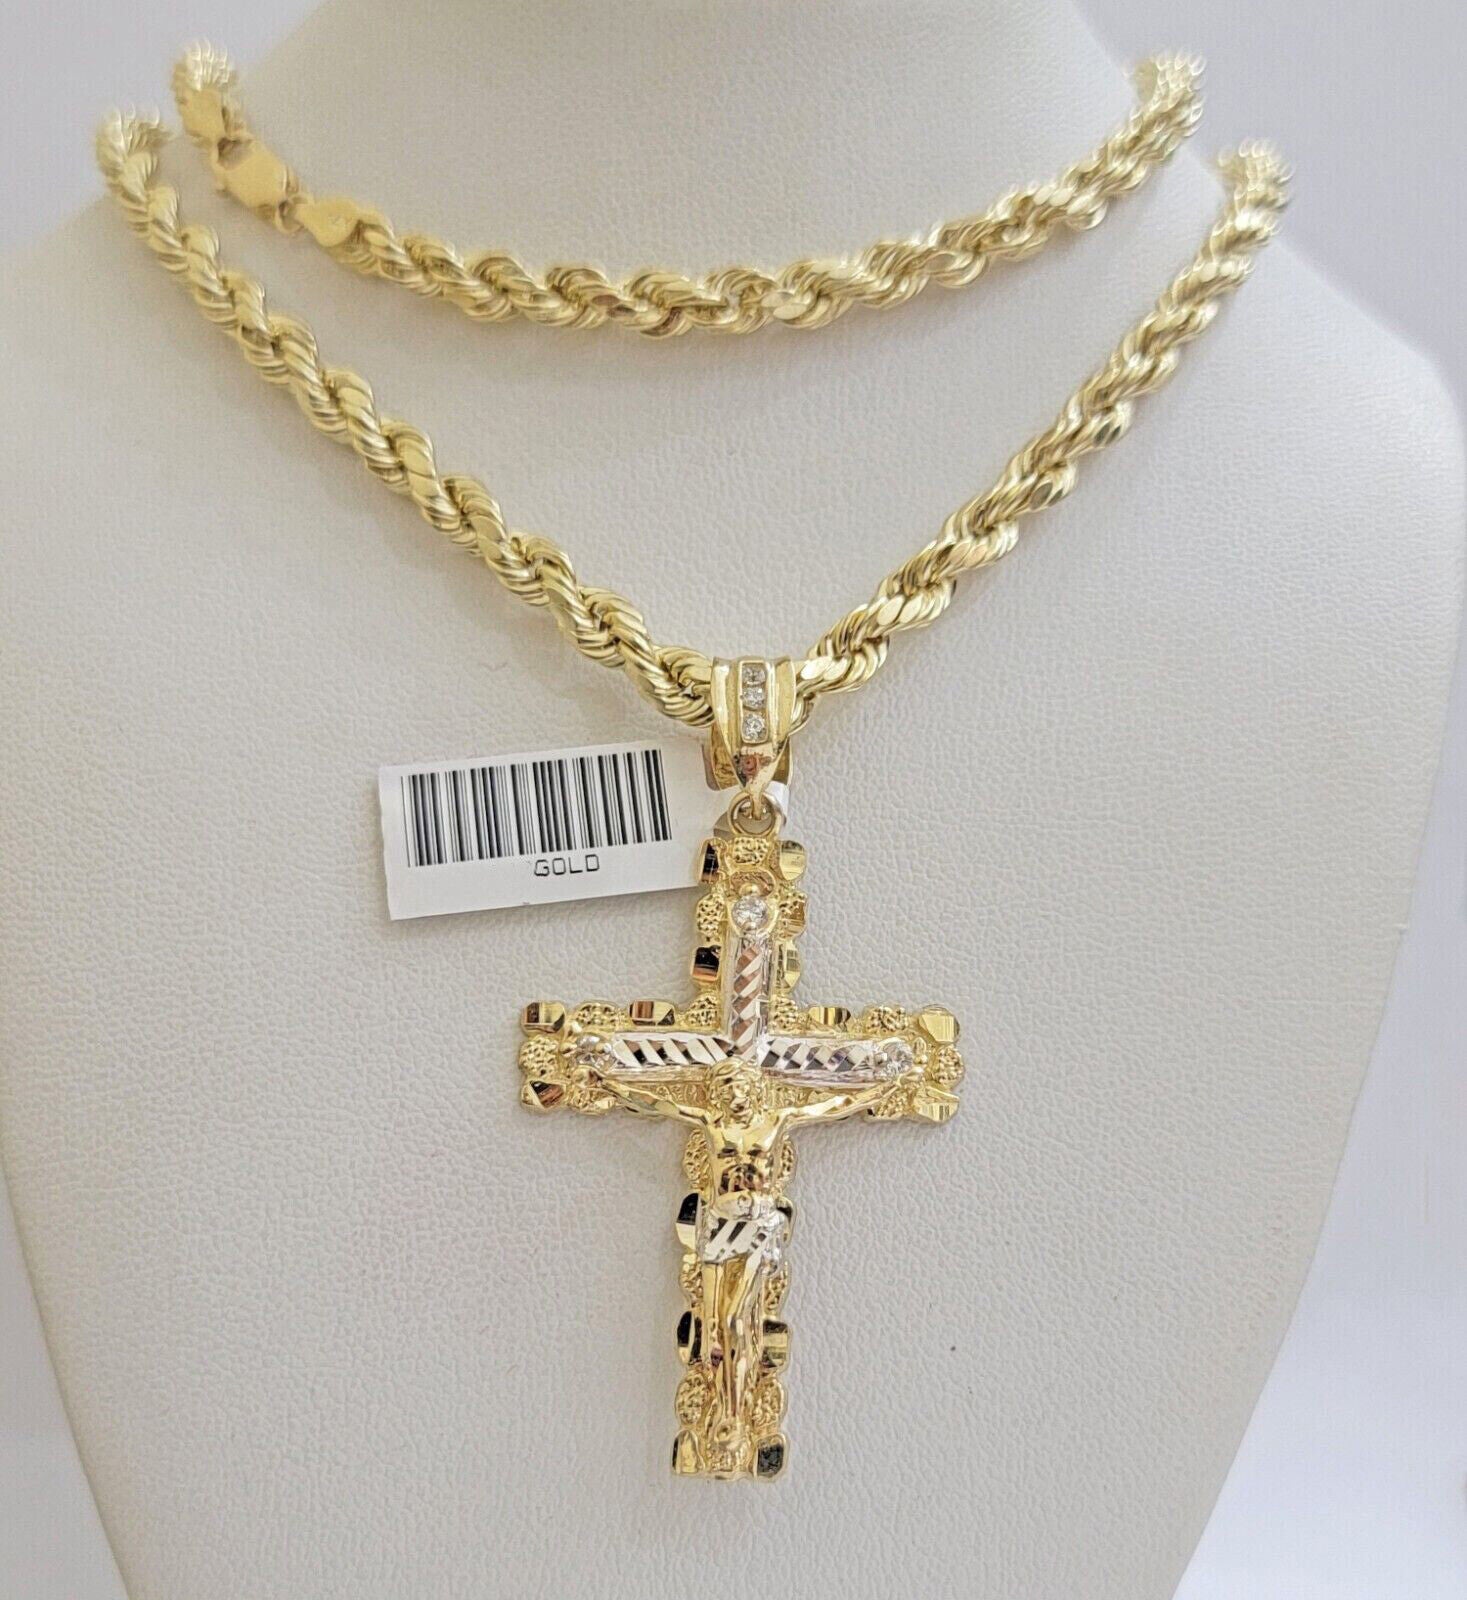 Real 10k Gold Rope Chain With Cross Charm Pendant Set 26 inch 4mm Necklace Men's